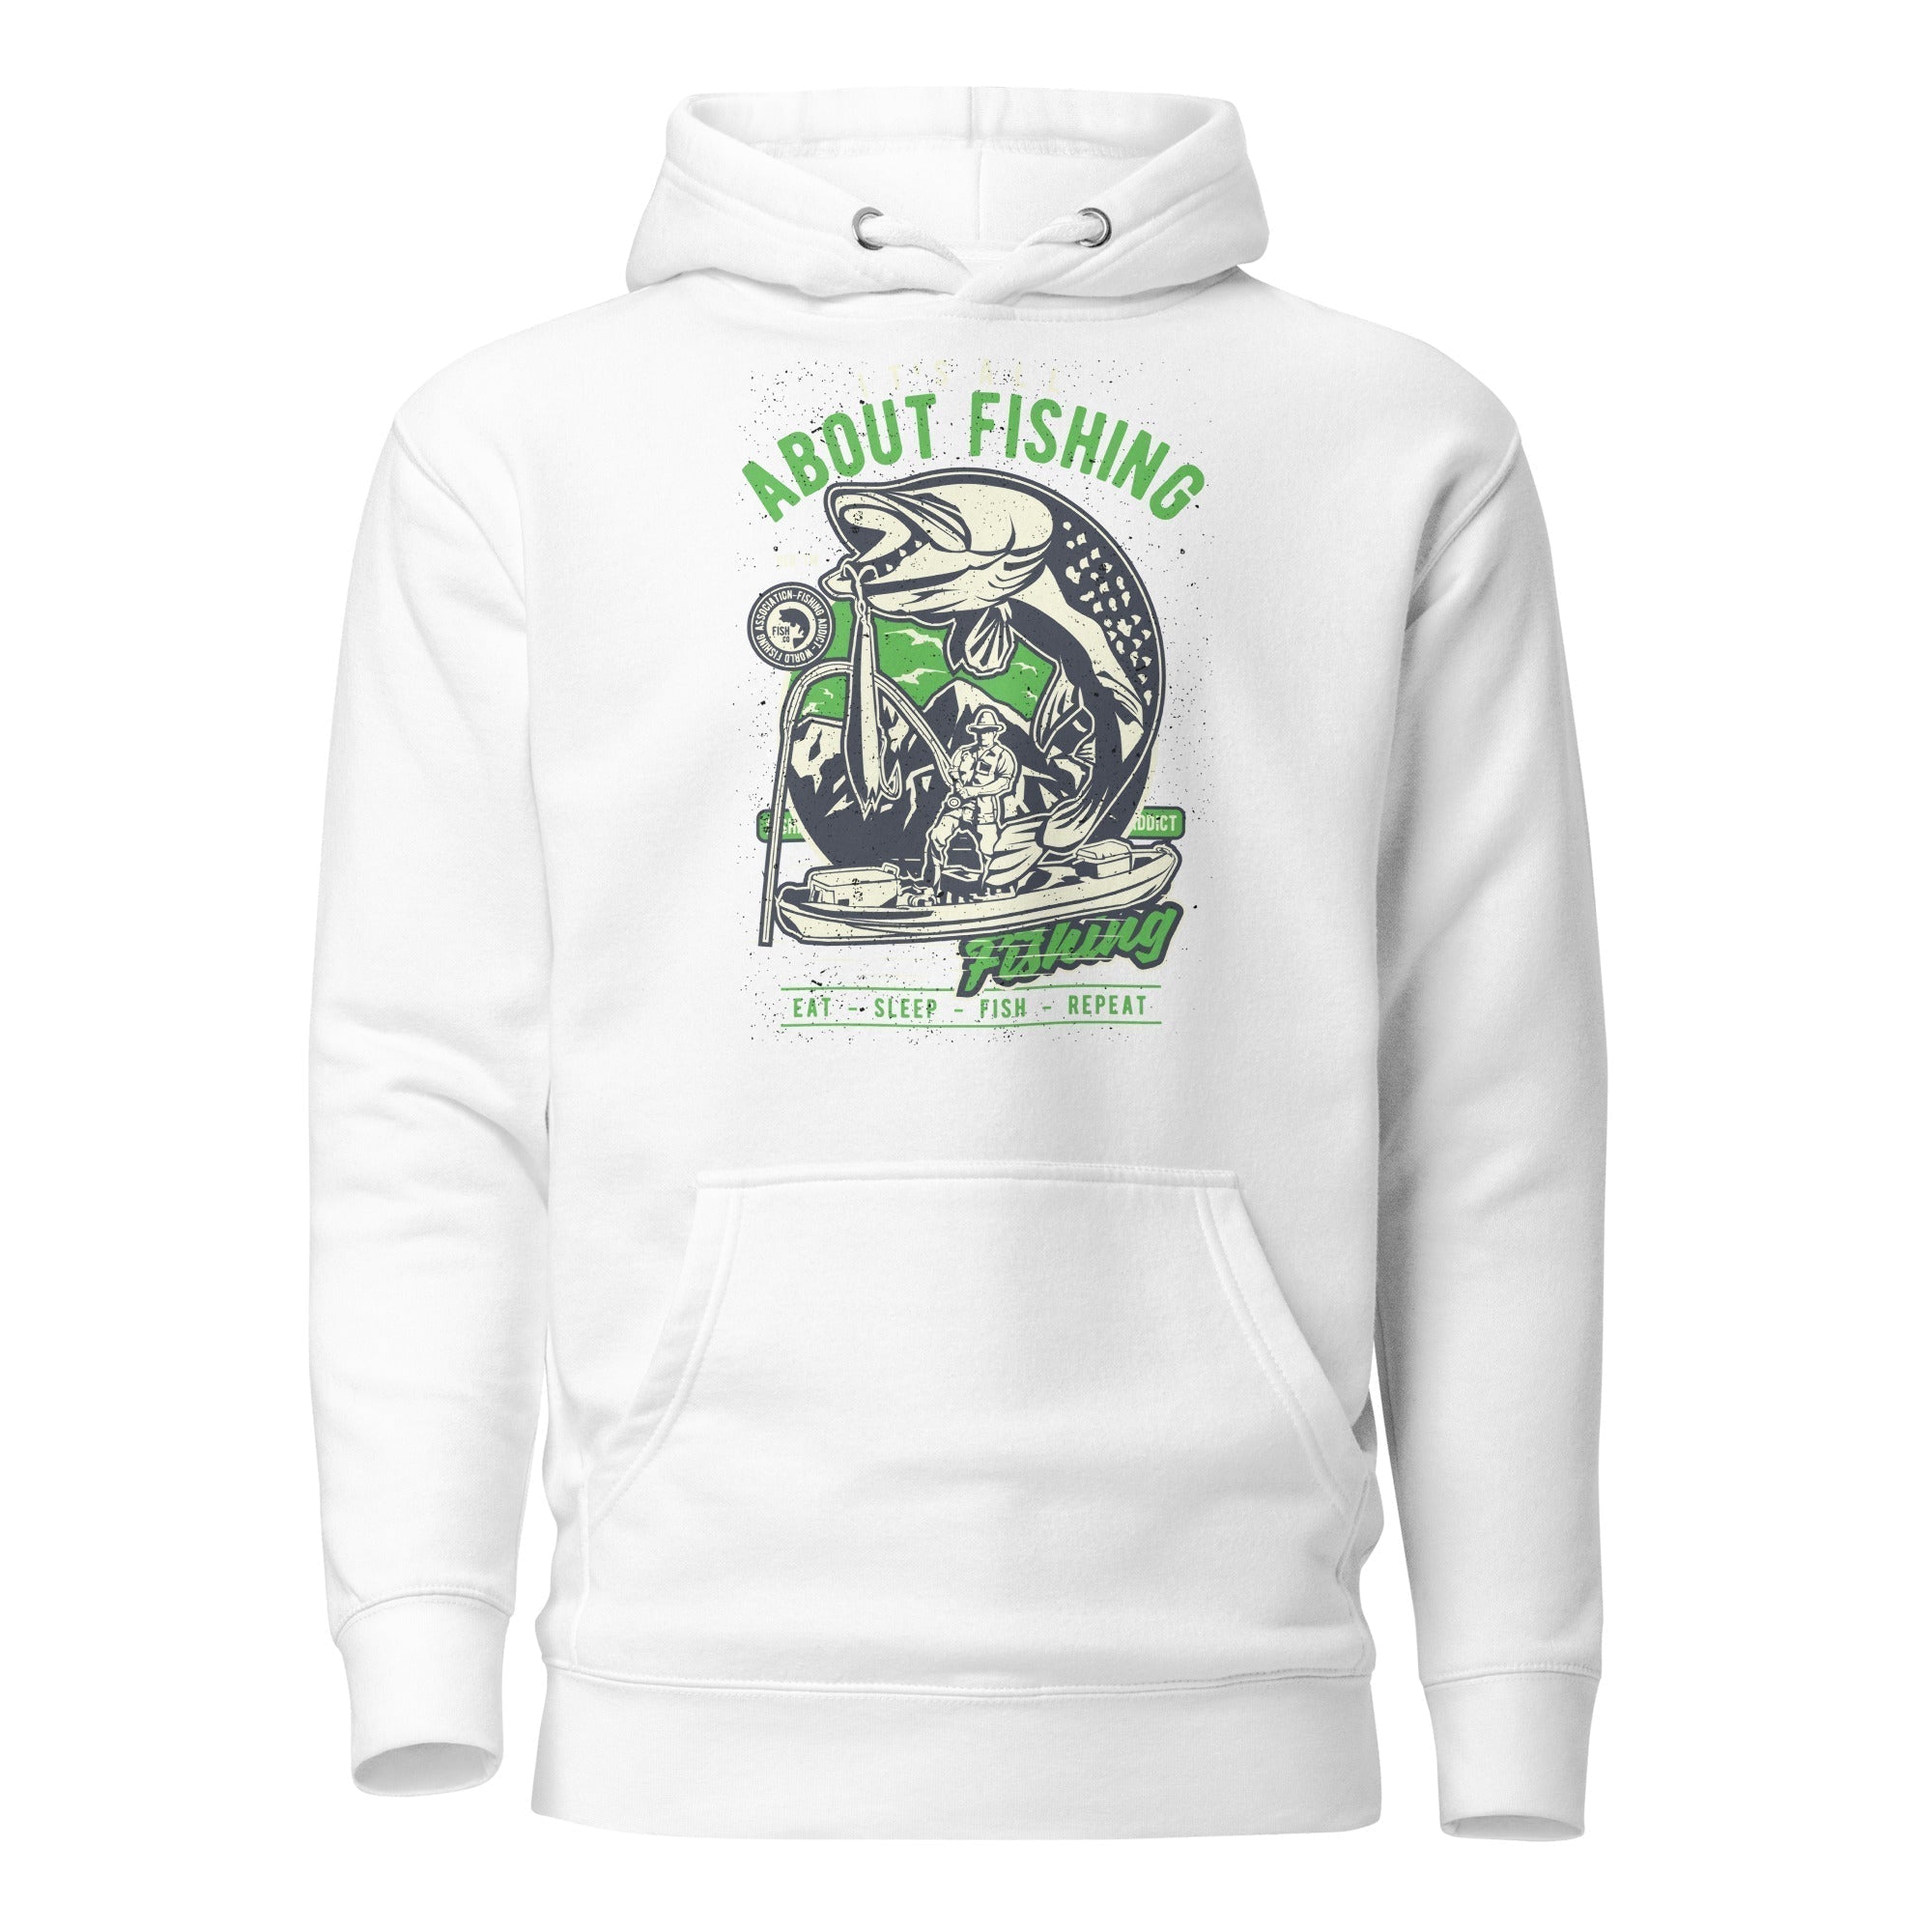 Unisex Premium Hoodie - Cotton Heritage - It's All About Fishing Eat Sleep Fish Repeat - GRAPHIC T-SHIRTS